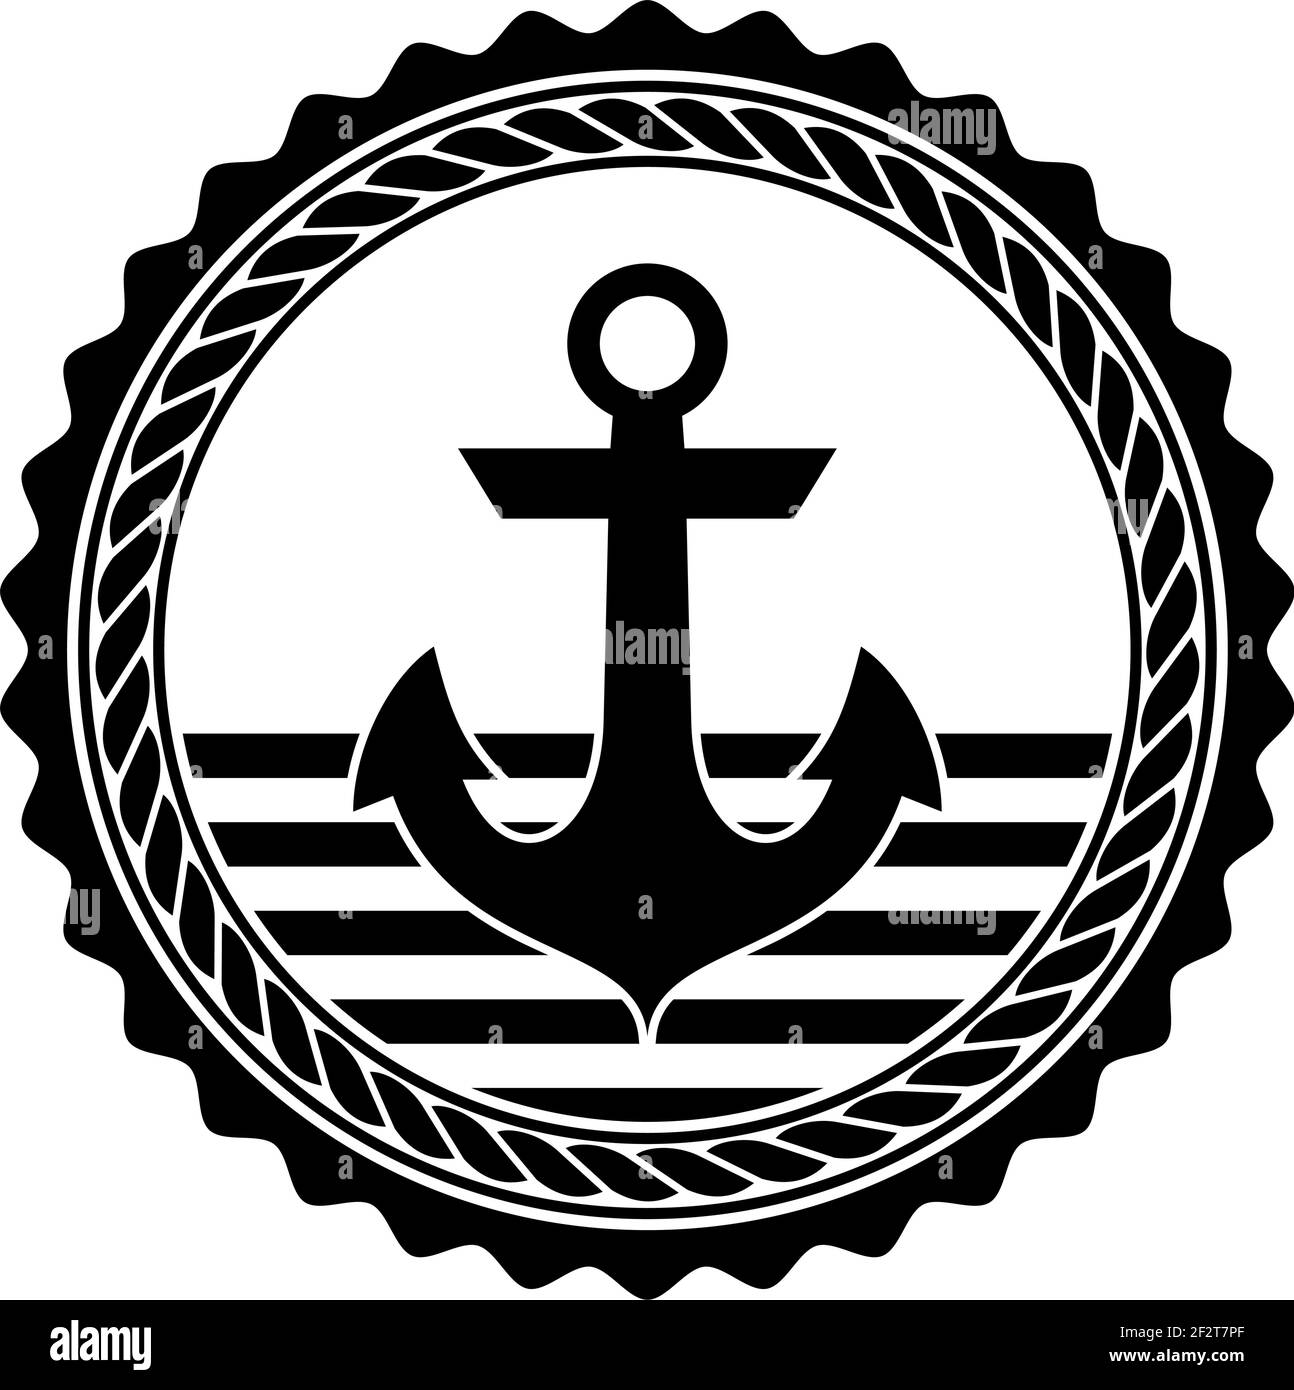 Anchor clip art Black and White Stock Photos & Images - Page 2 - Alamy